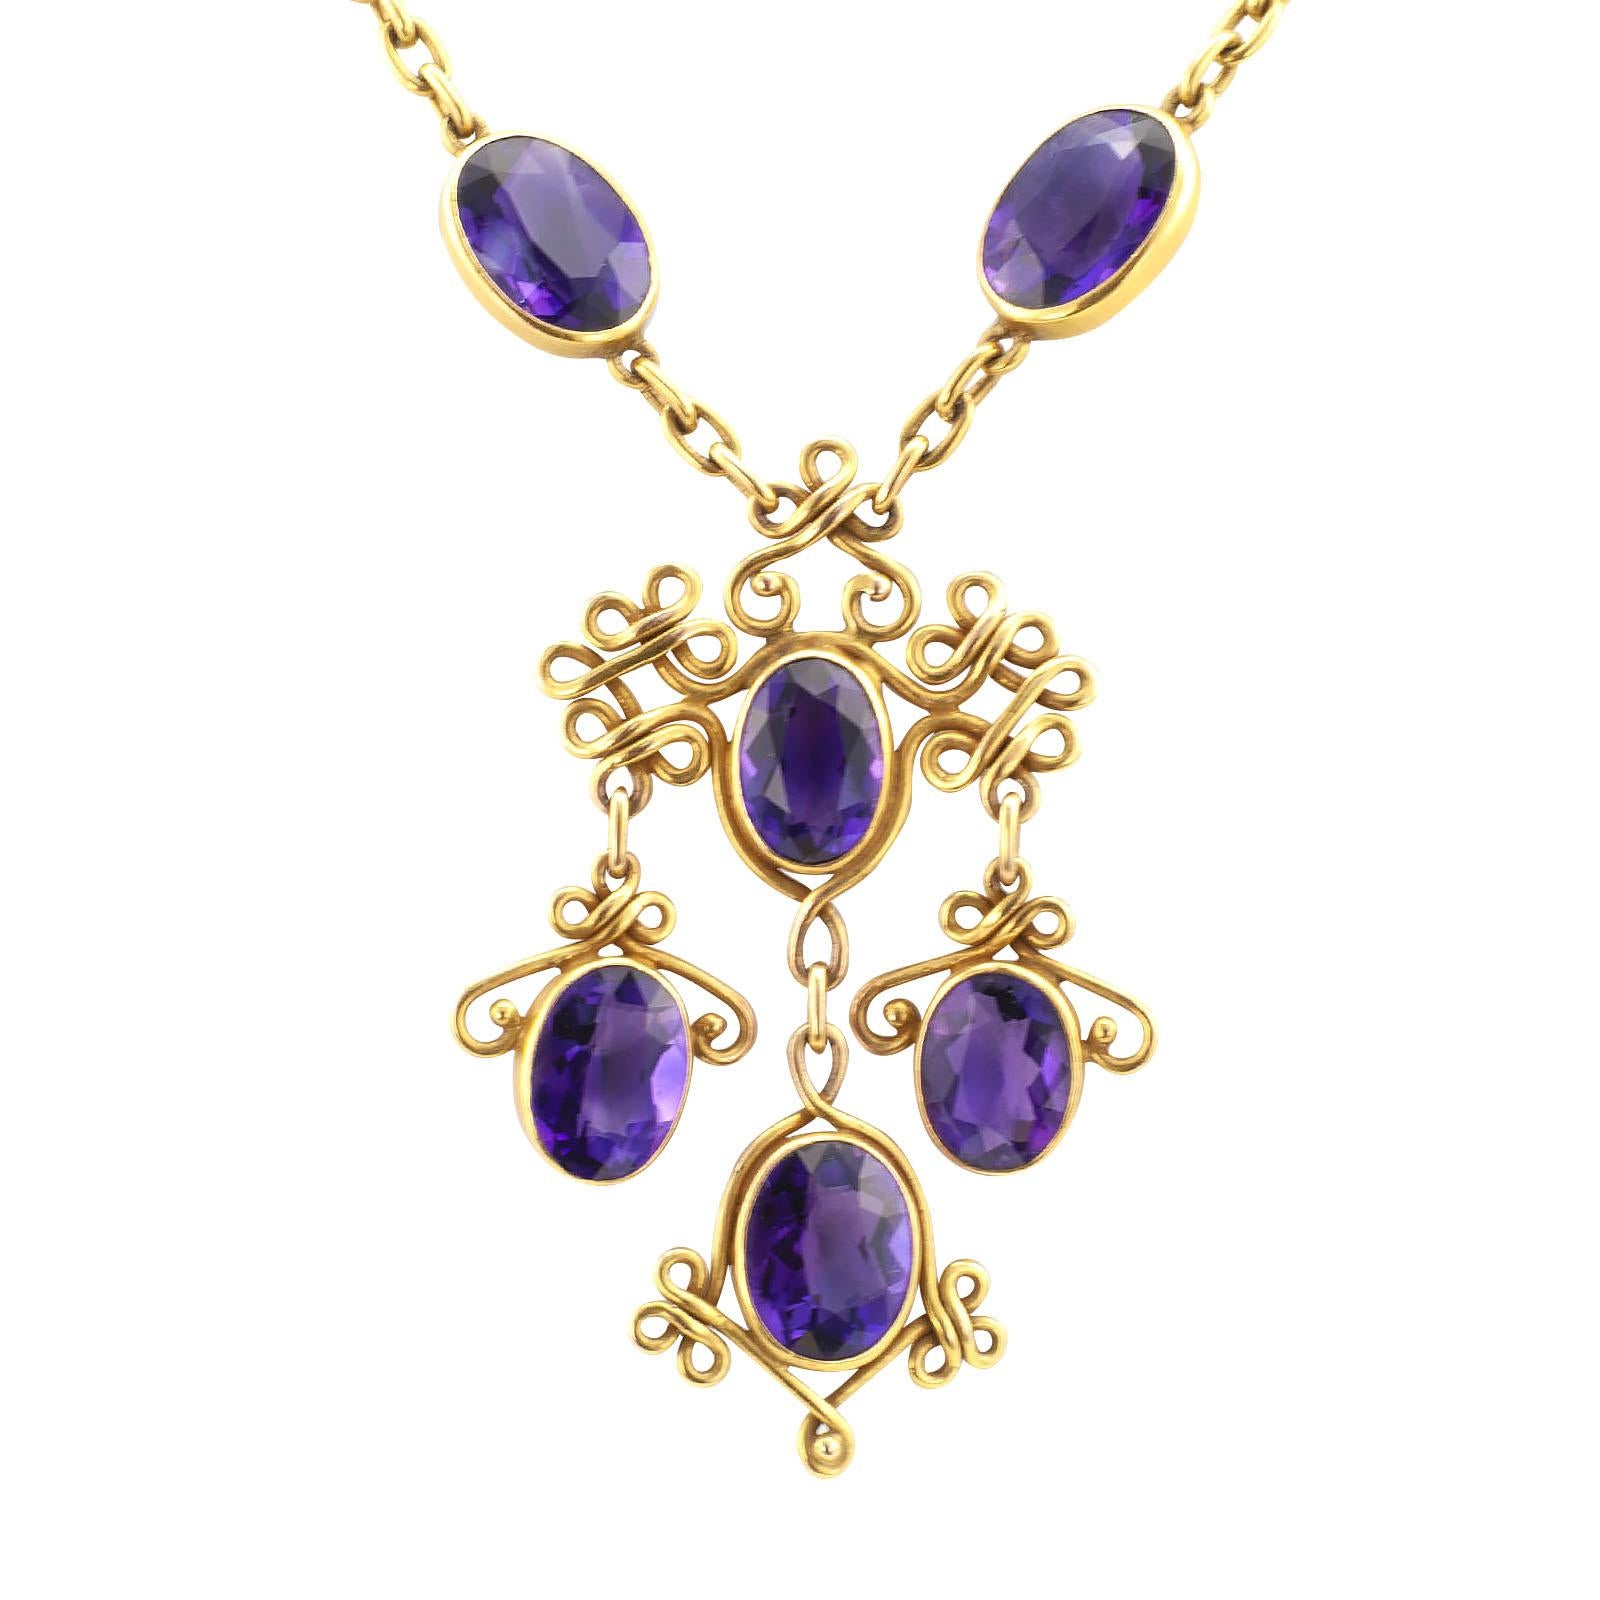 Art Nouveau handcrafted amethyst and yellow gold necklace circa 1905.

DETAILS:

GEMSTONES: ten oval amethyst totaling approximately 25.00 carats.

METAL: 14-karat yellow gold.

MEASUREMENTS: 16” (40.6 cm) long overall.

CONDITION: high